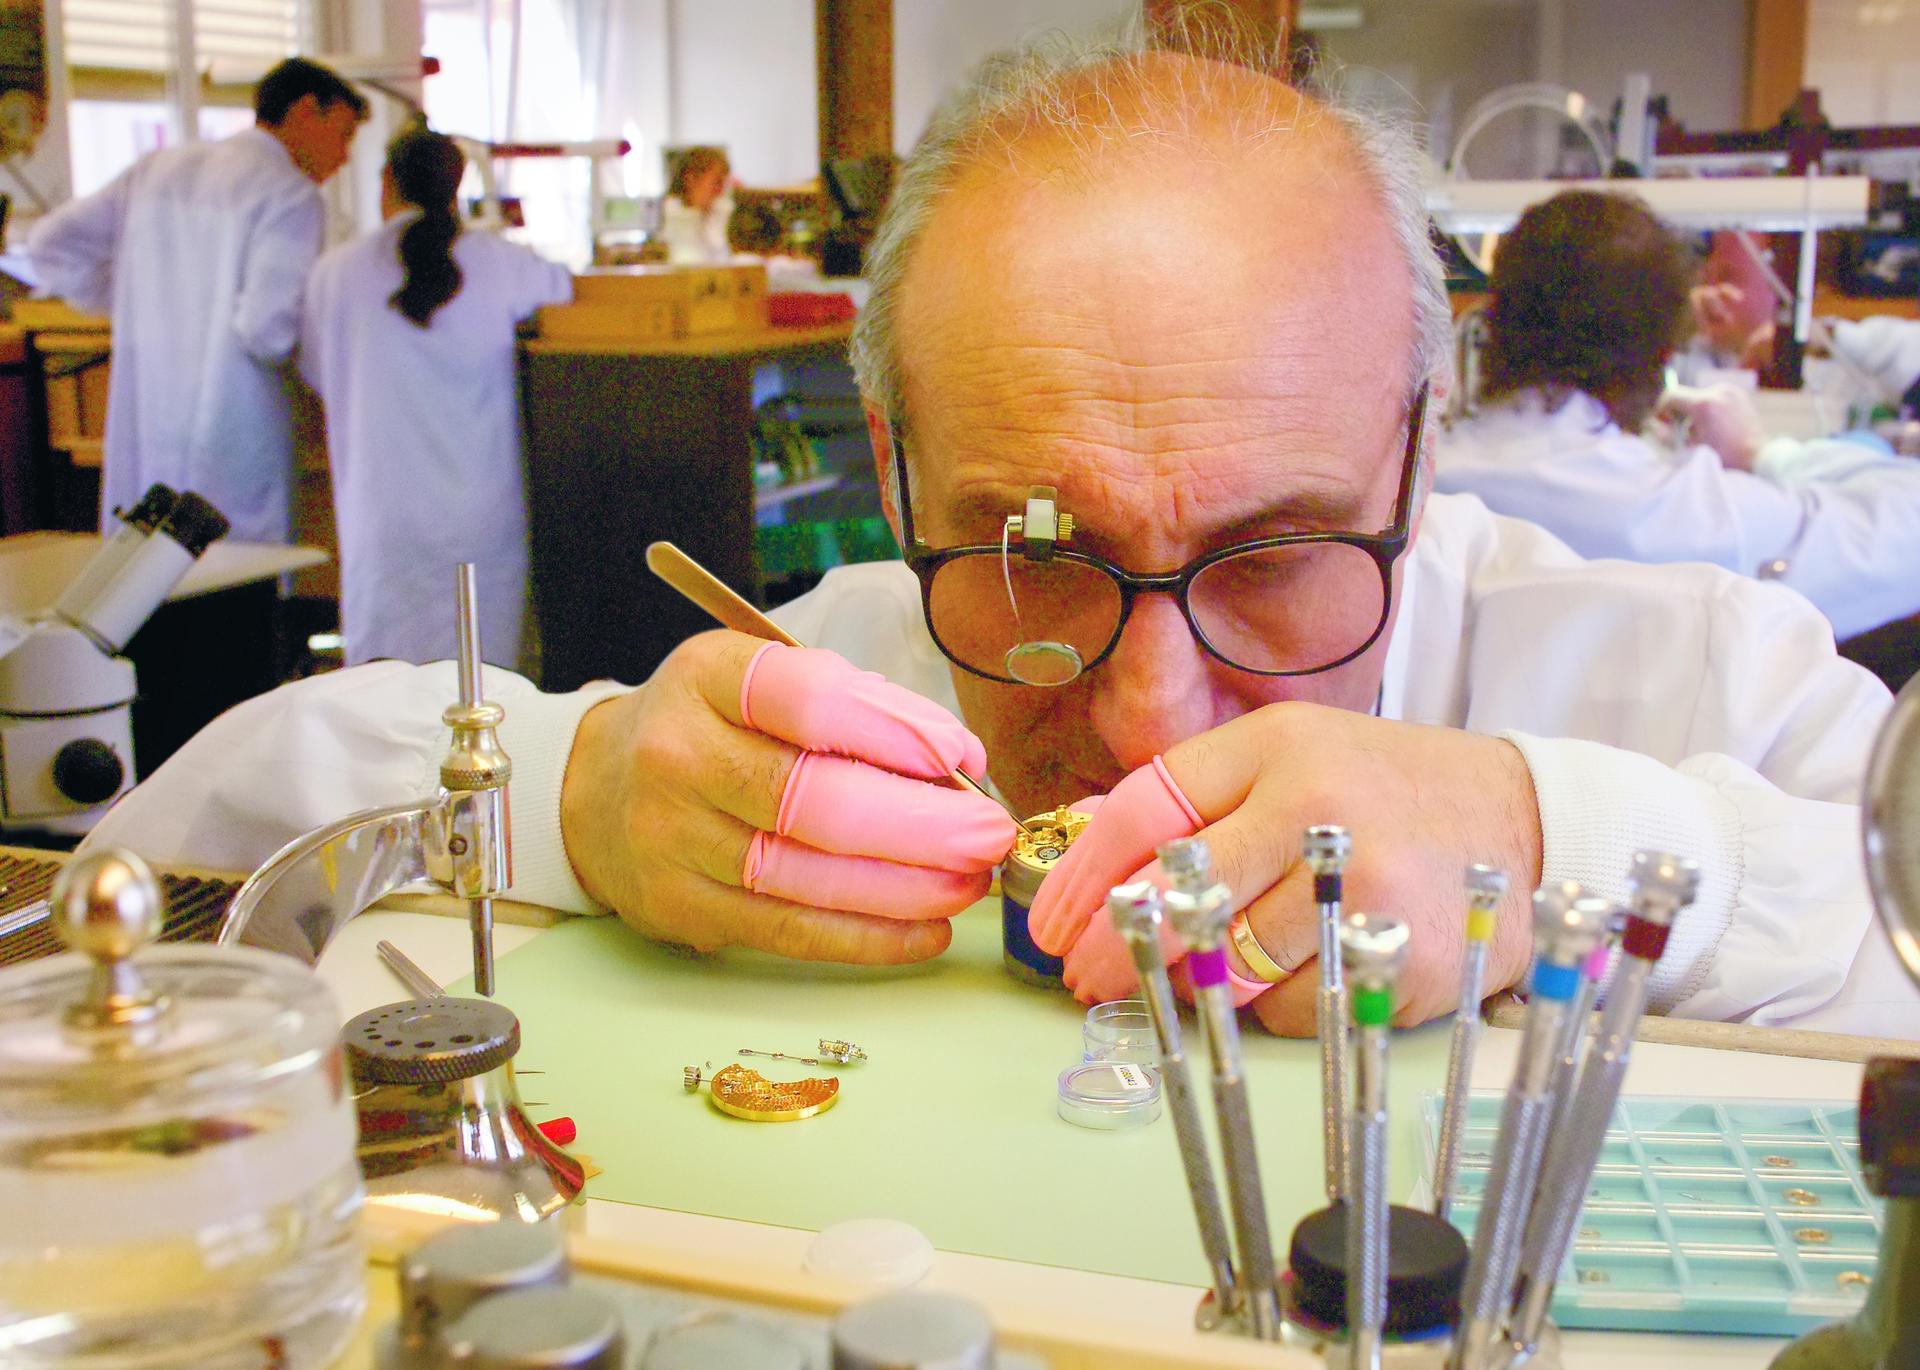 A Breguet craftsman concentrates on his complex work.